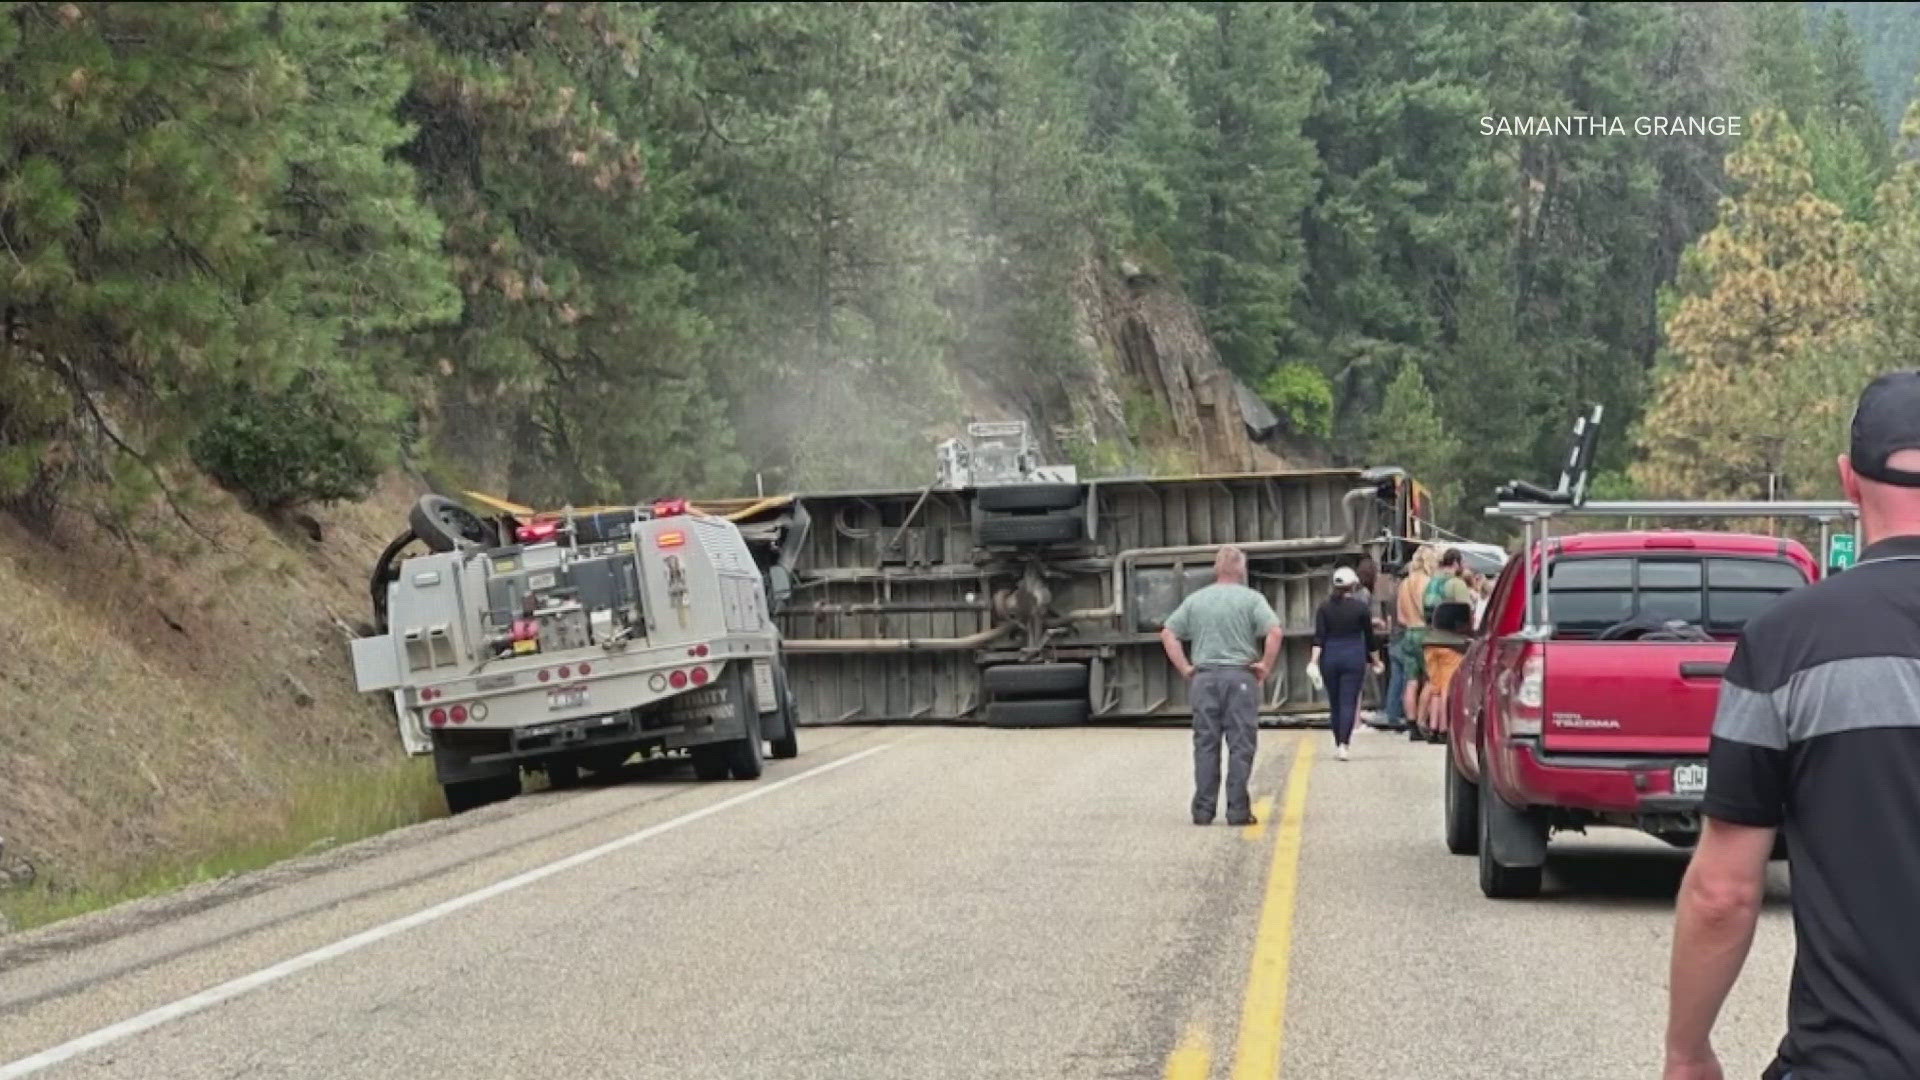 The bus was carrying 28 youth campers and staff back to Boise from the Treasure Valley YMCA’s camp in August 2023 when it crashed, injuring several passengers.